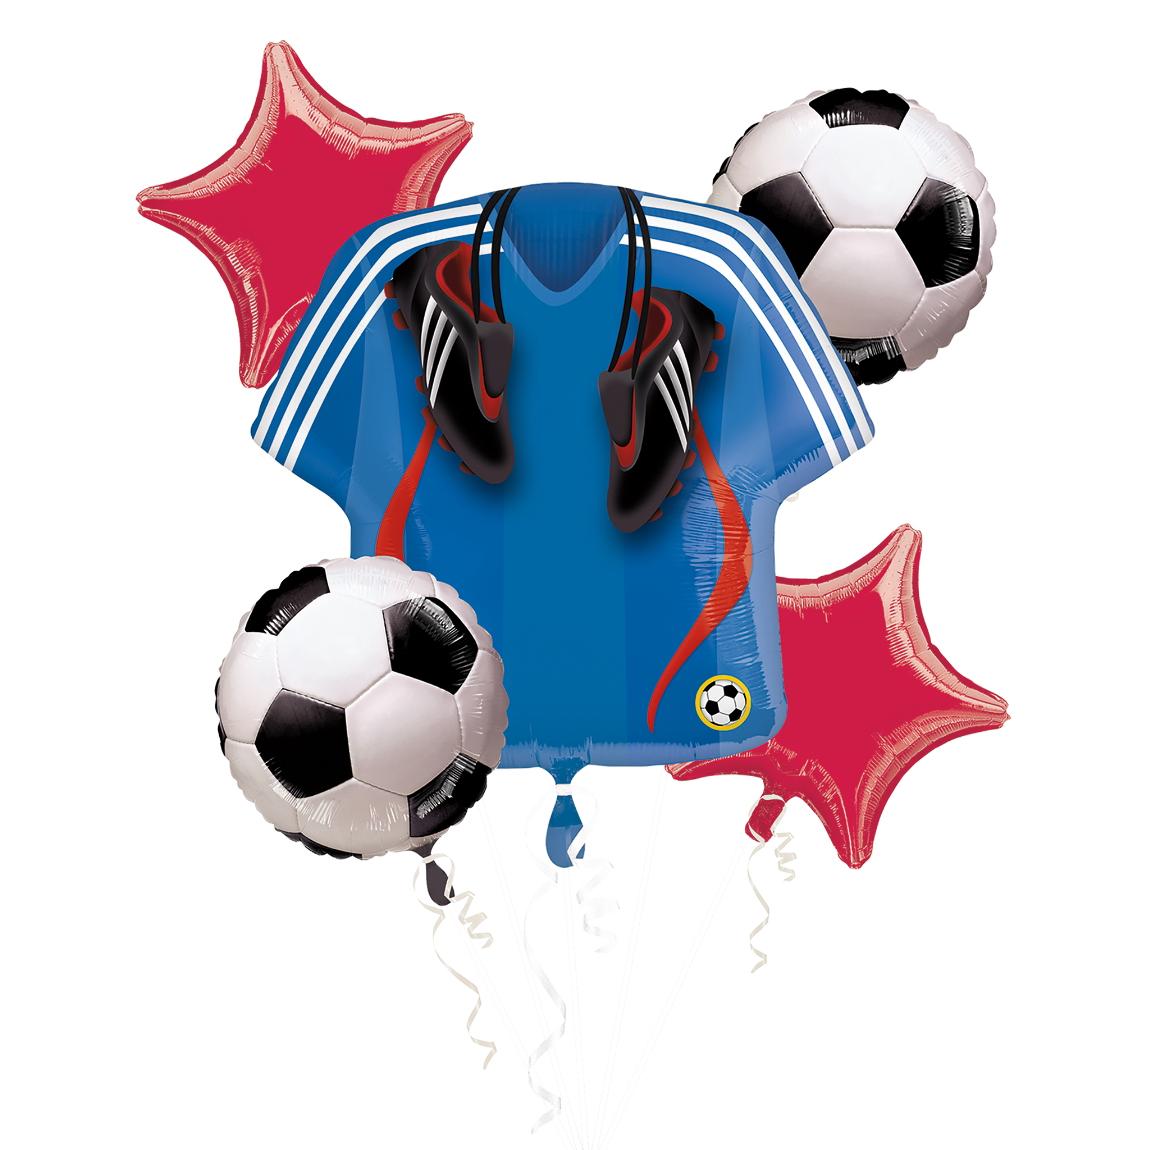 Soccer Balloon Bouquet 5ct Balloons & Streamers - Party Centre - Party Centre